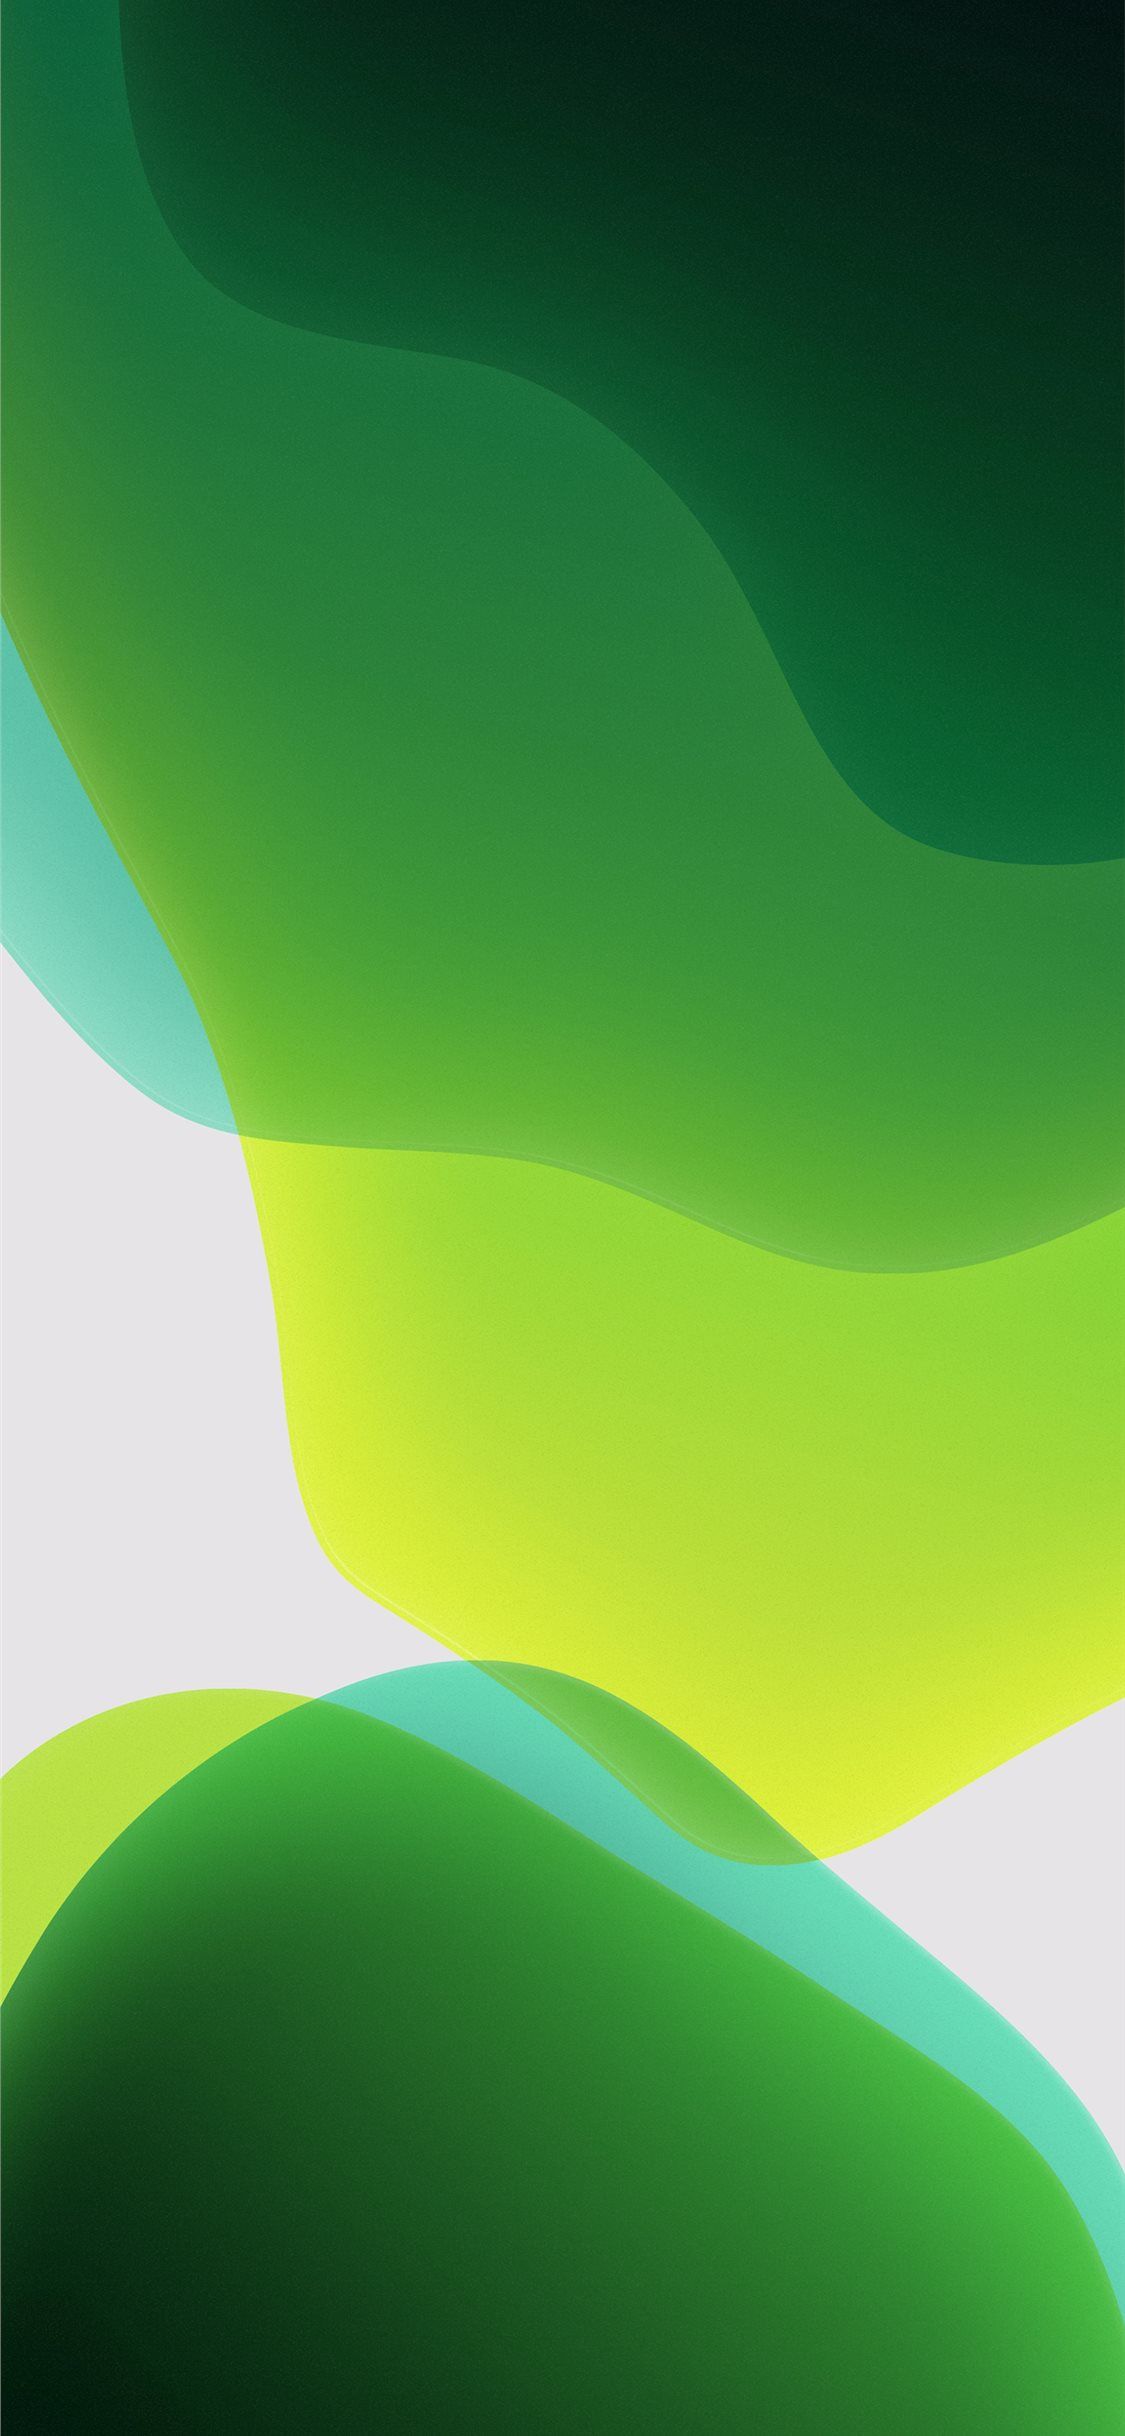 ios 13 iPhone X Wallpapers Free Download